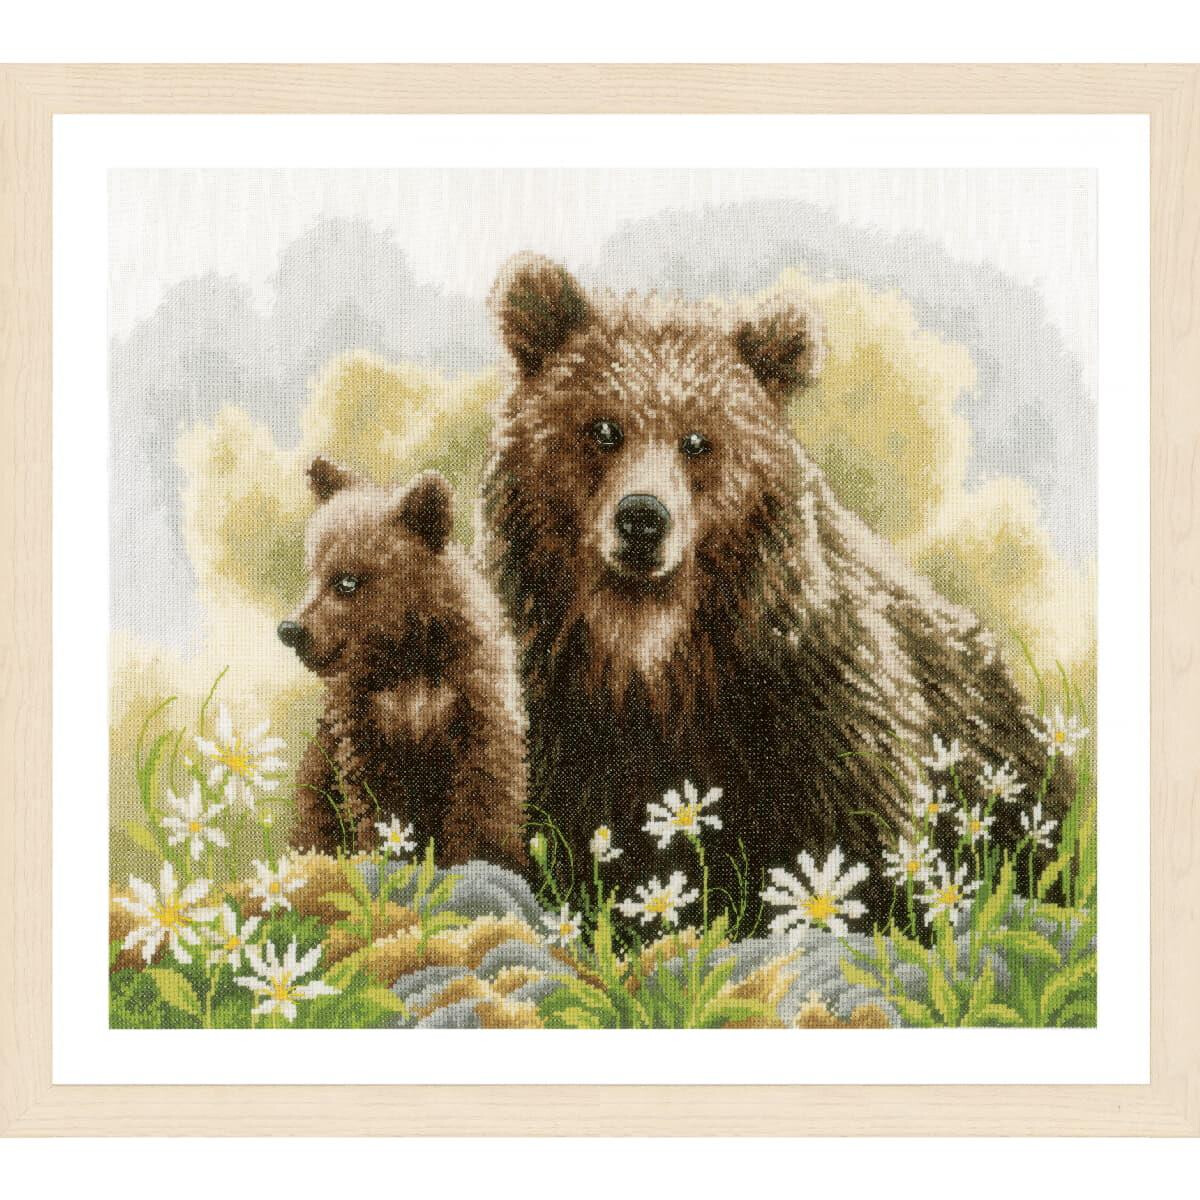 A beautiful cross stitch artwork depicts a brown bear and...